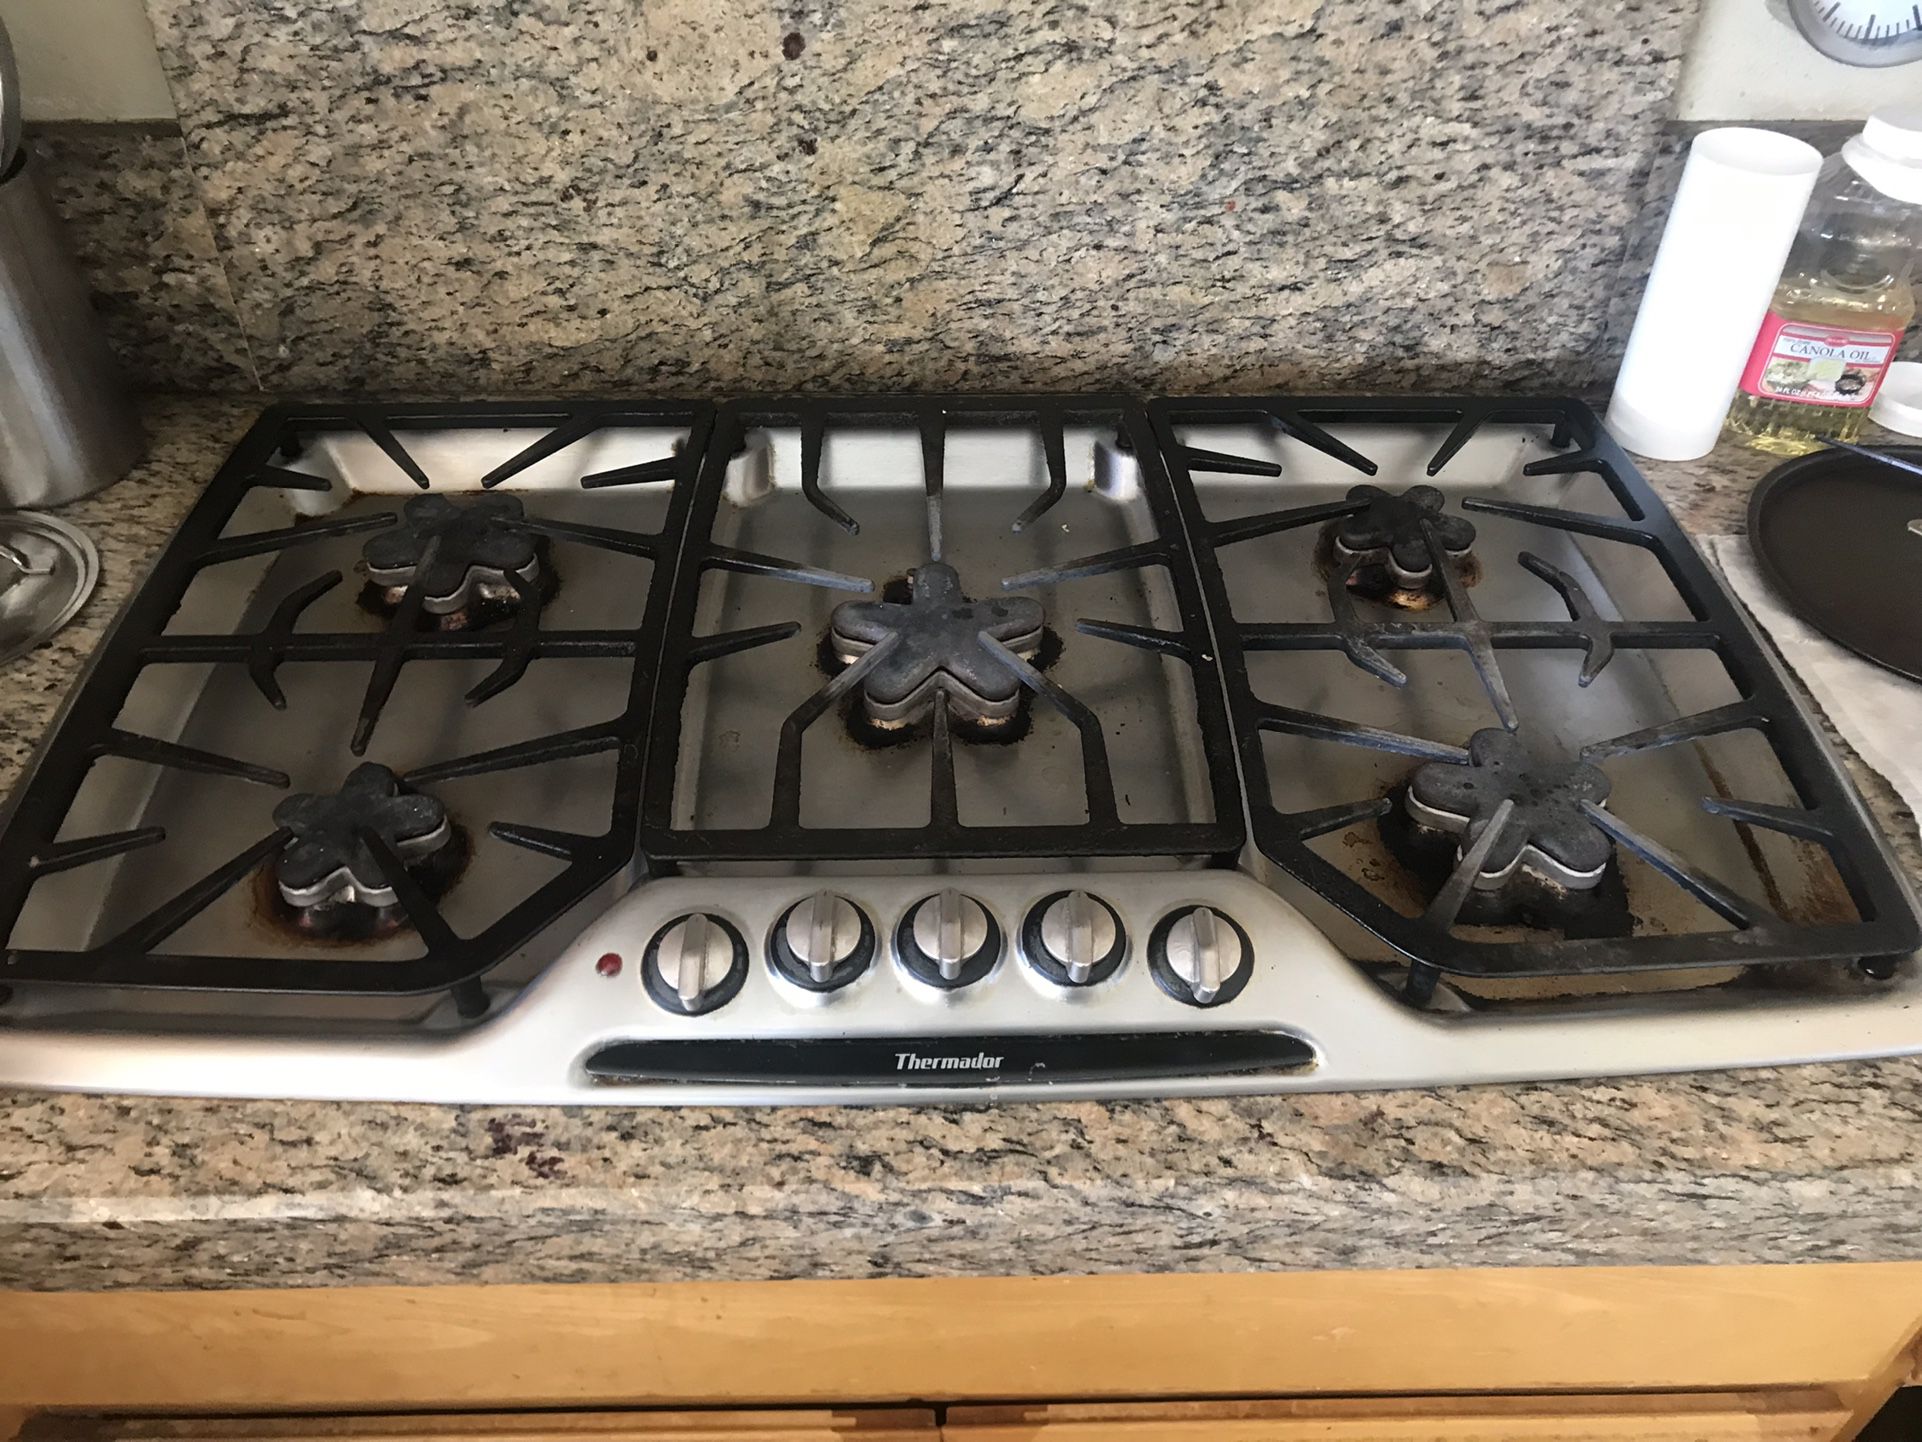 Thermador gas cooktop 36” - $100 (south san francisco) 1 Works fine surface clean enough  may be 8 out of 10 rating  